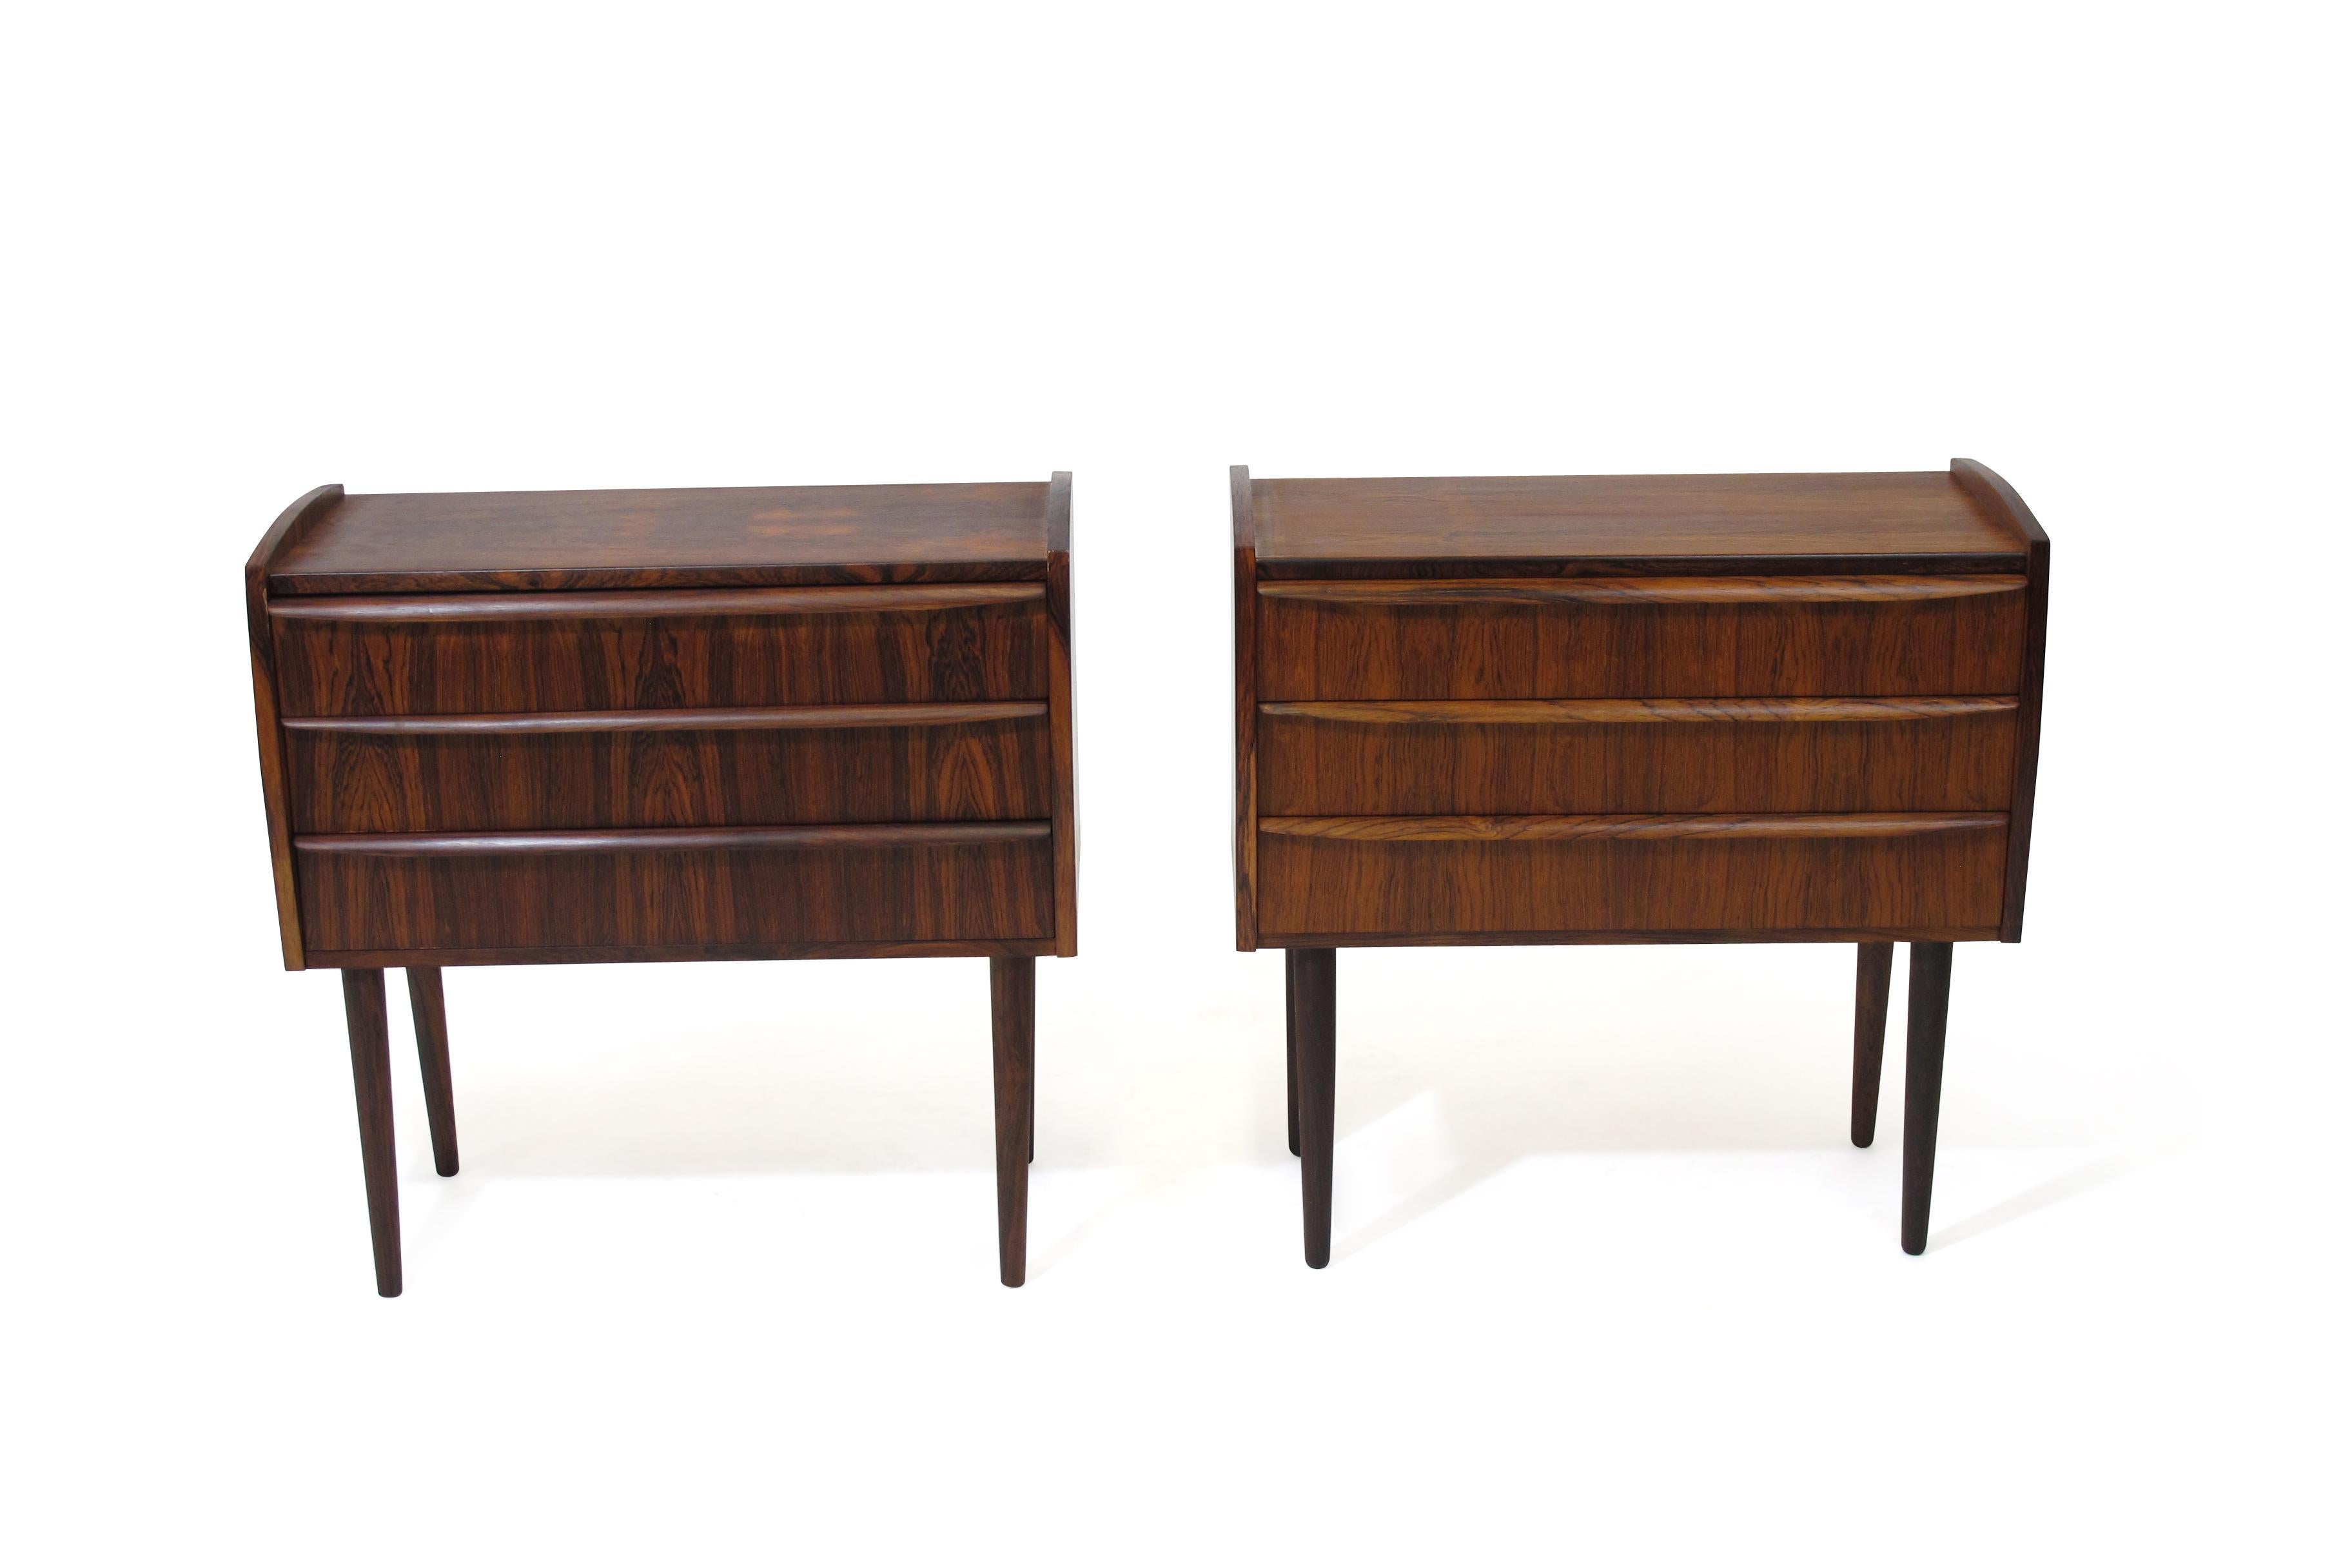 Danish Brazilian rosewood cabinets each with three drawers and carved pulls, book-matched grain, and raised on stilted legs. The cabinets have been fully restored in a natural oil finish and in excellent condition with minor sign of age and use.